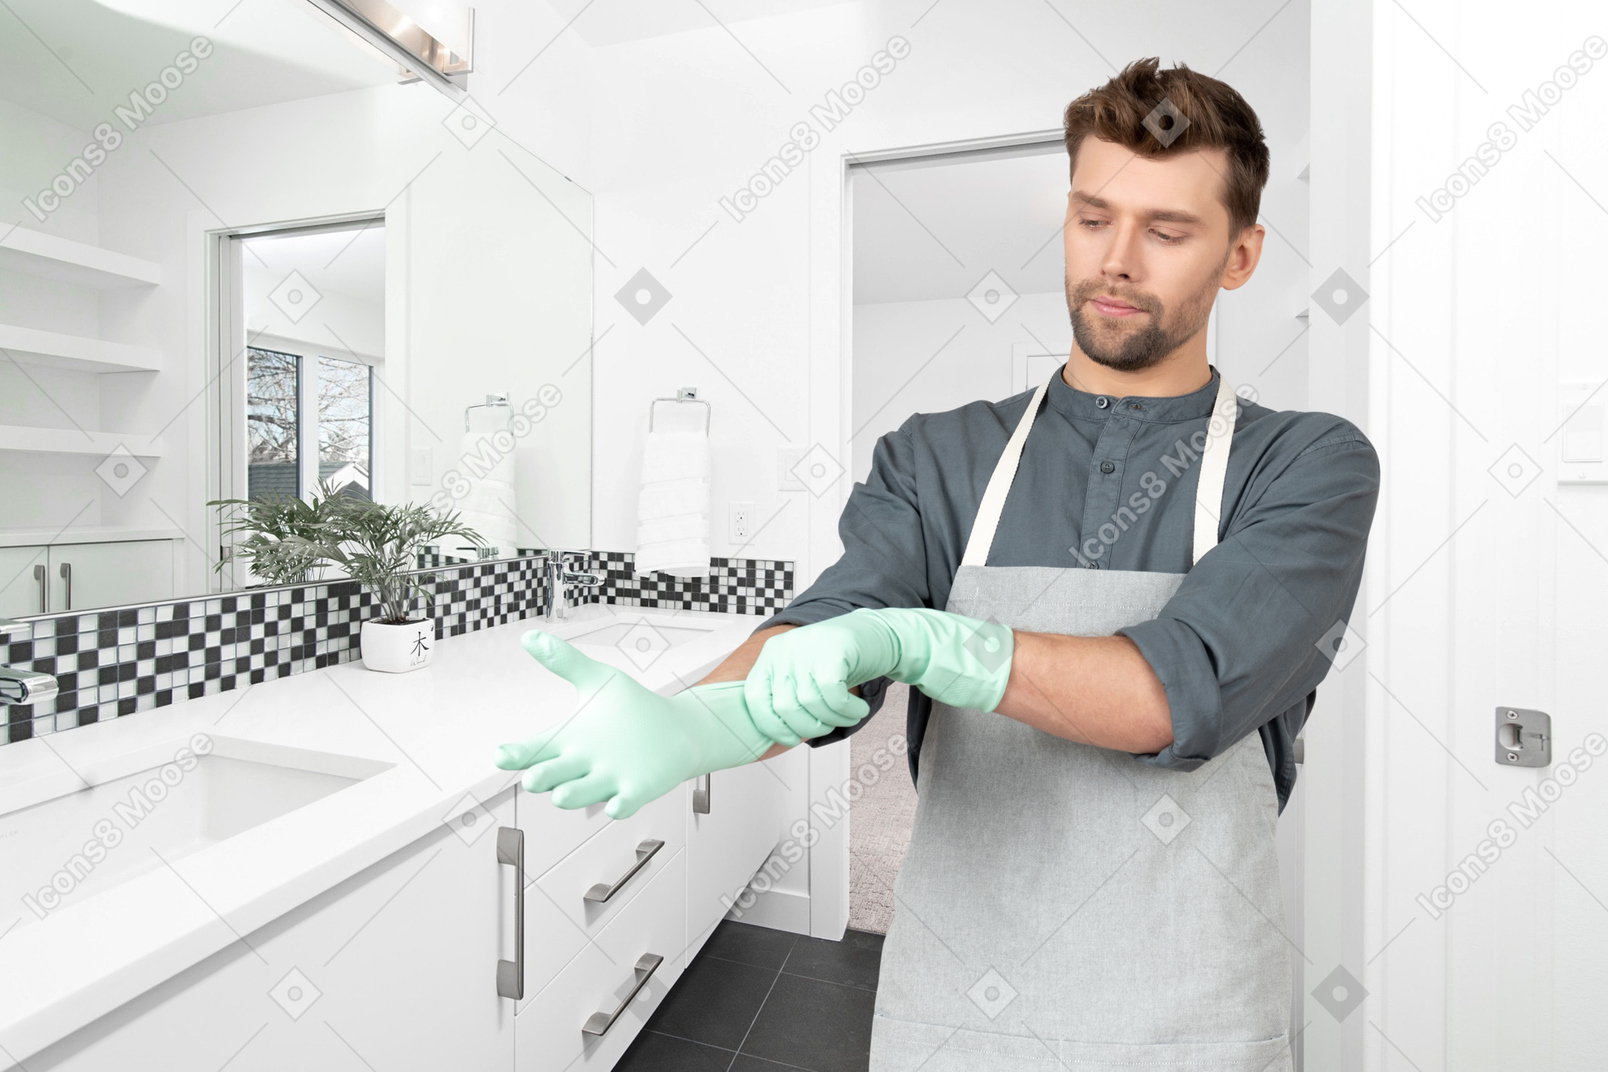 A man in an apron wearing gloves in a bathroom